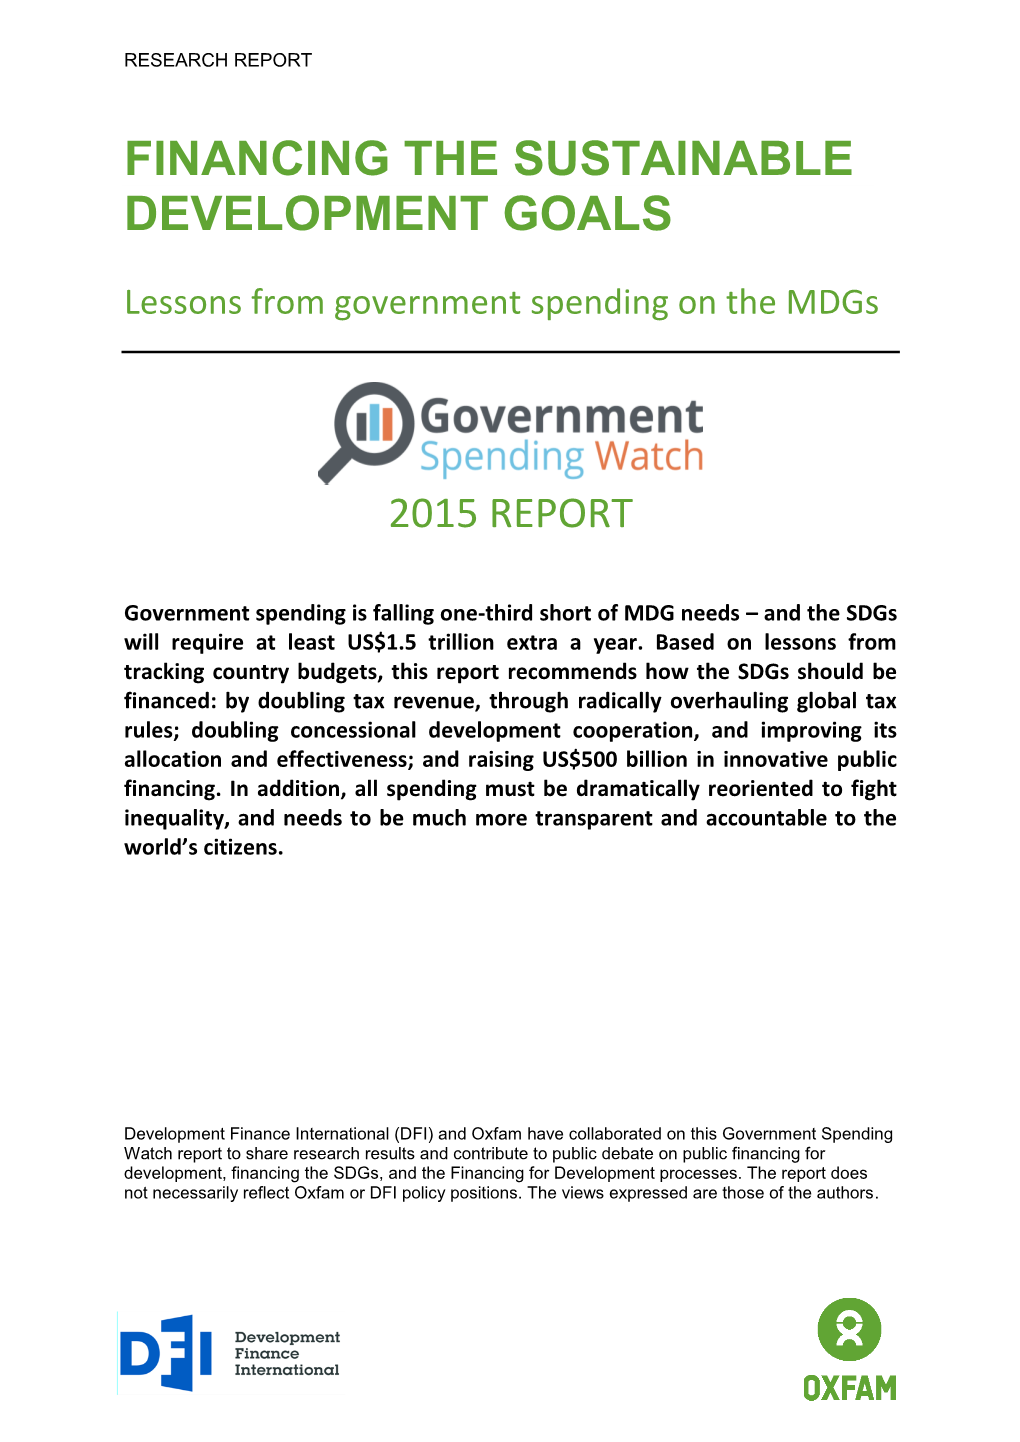 Financing the Sustainable Development Goals: Lessons from Government Spending on the Mdgs